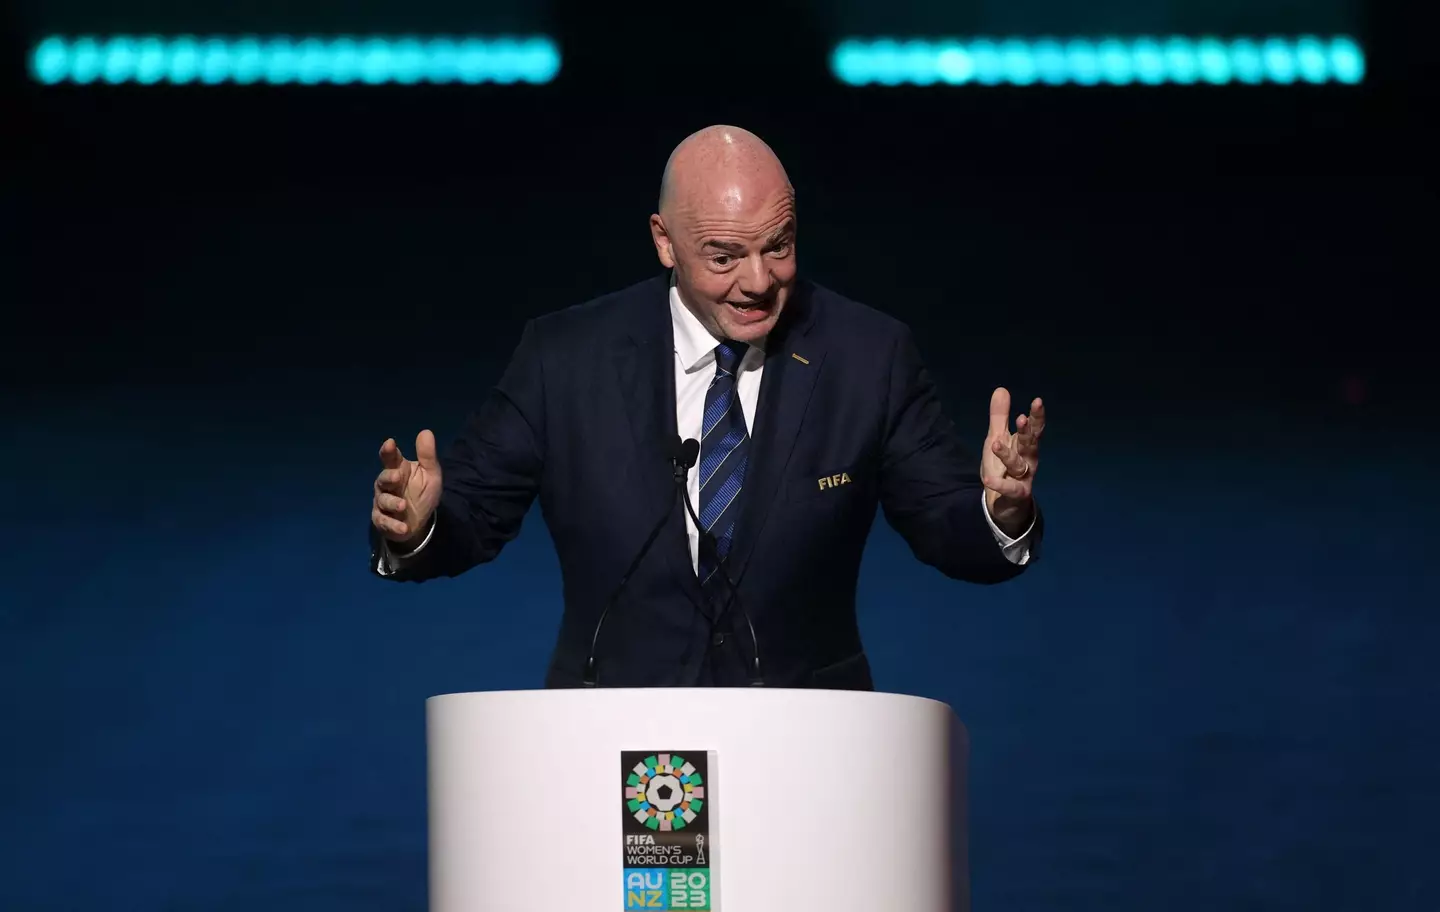 Gianni Infantino will soon confirm that the format of the 2026 World Cup will change